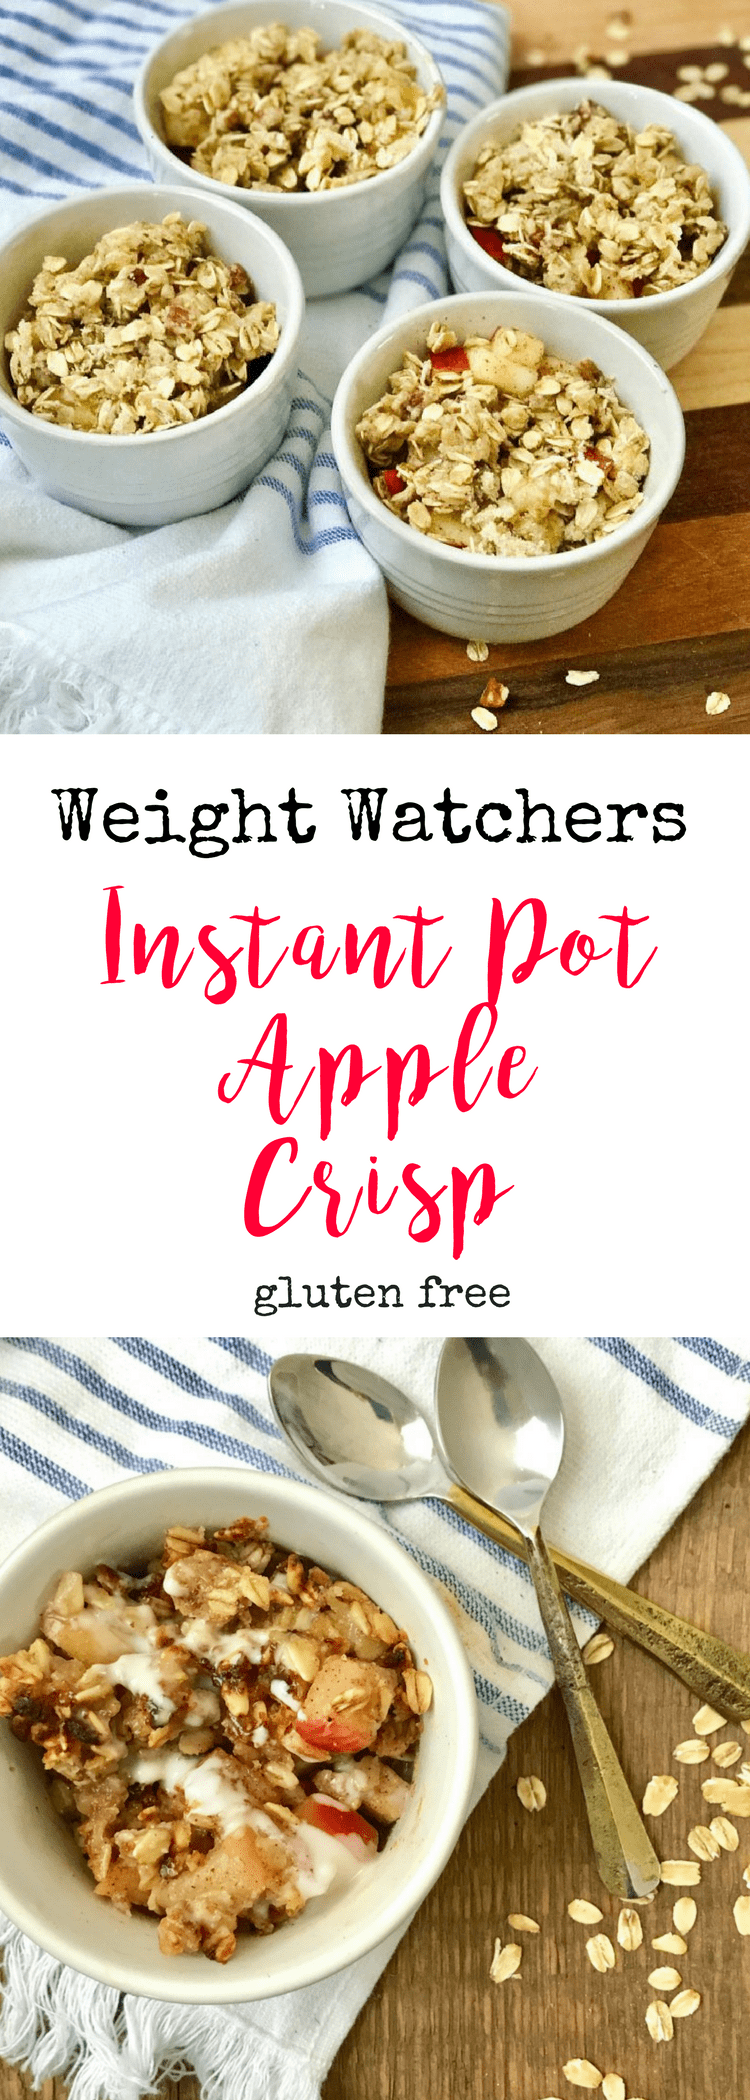 Weight Watchers Instant Pot Apple Crisp | Confessions of a Fit Foodie